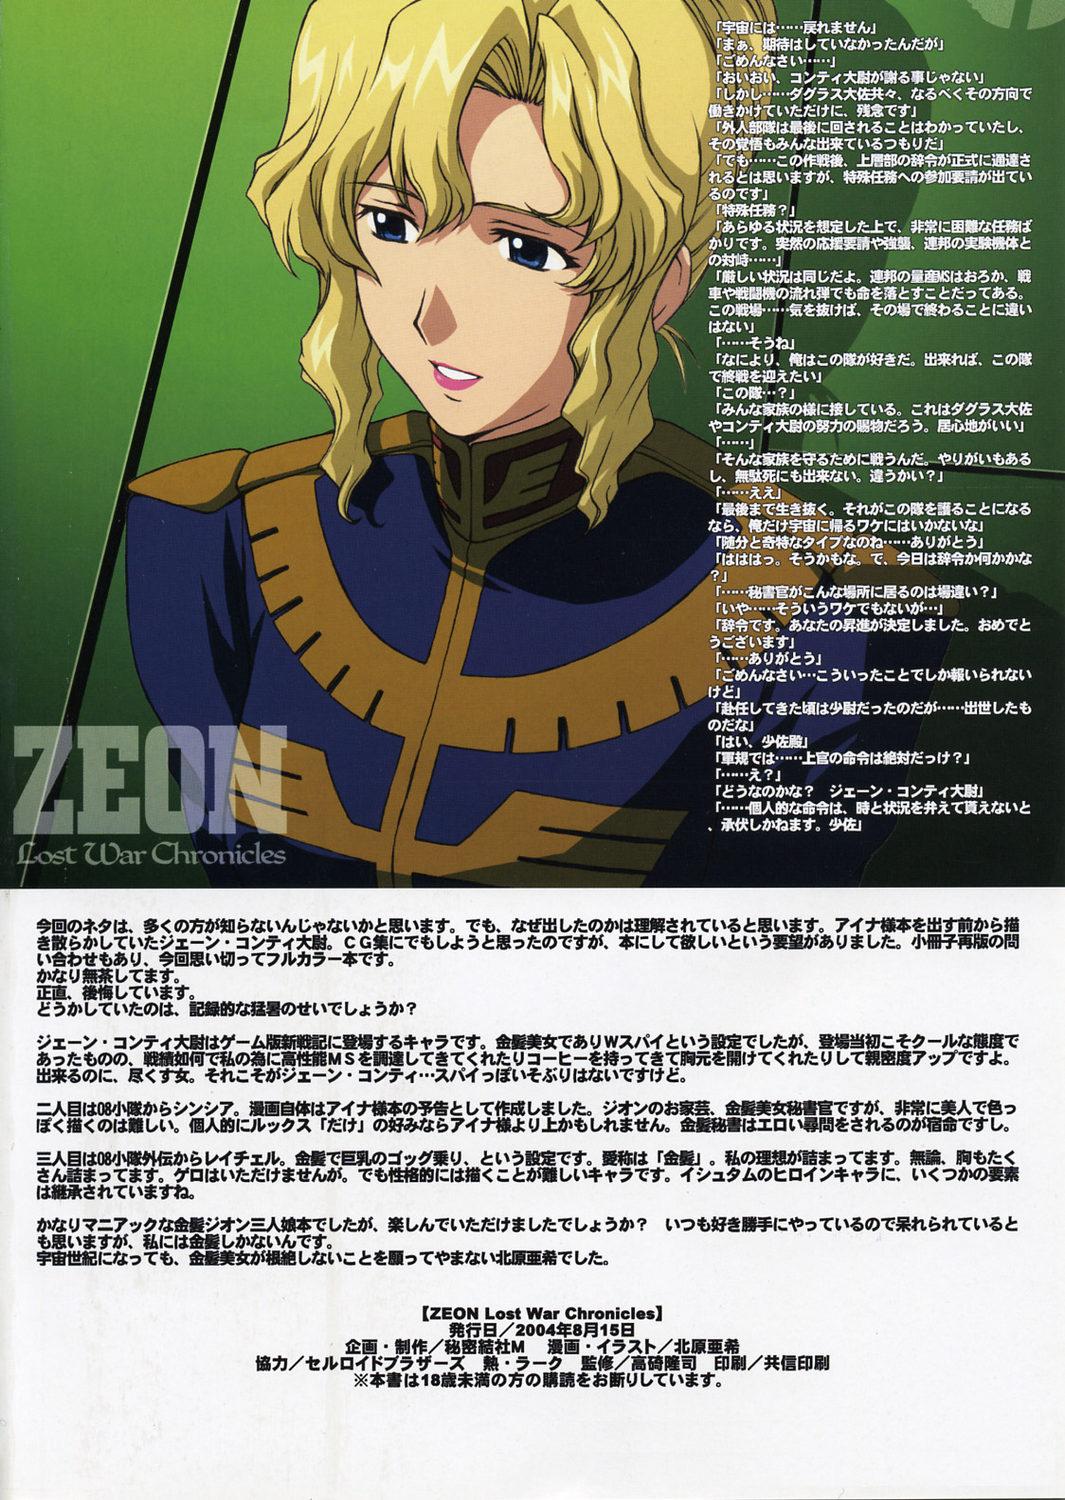 Mom ZEON Lost War Chronicles - Mobile suit gundam lost war chronicles Jacking - Page 33